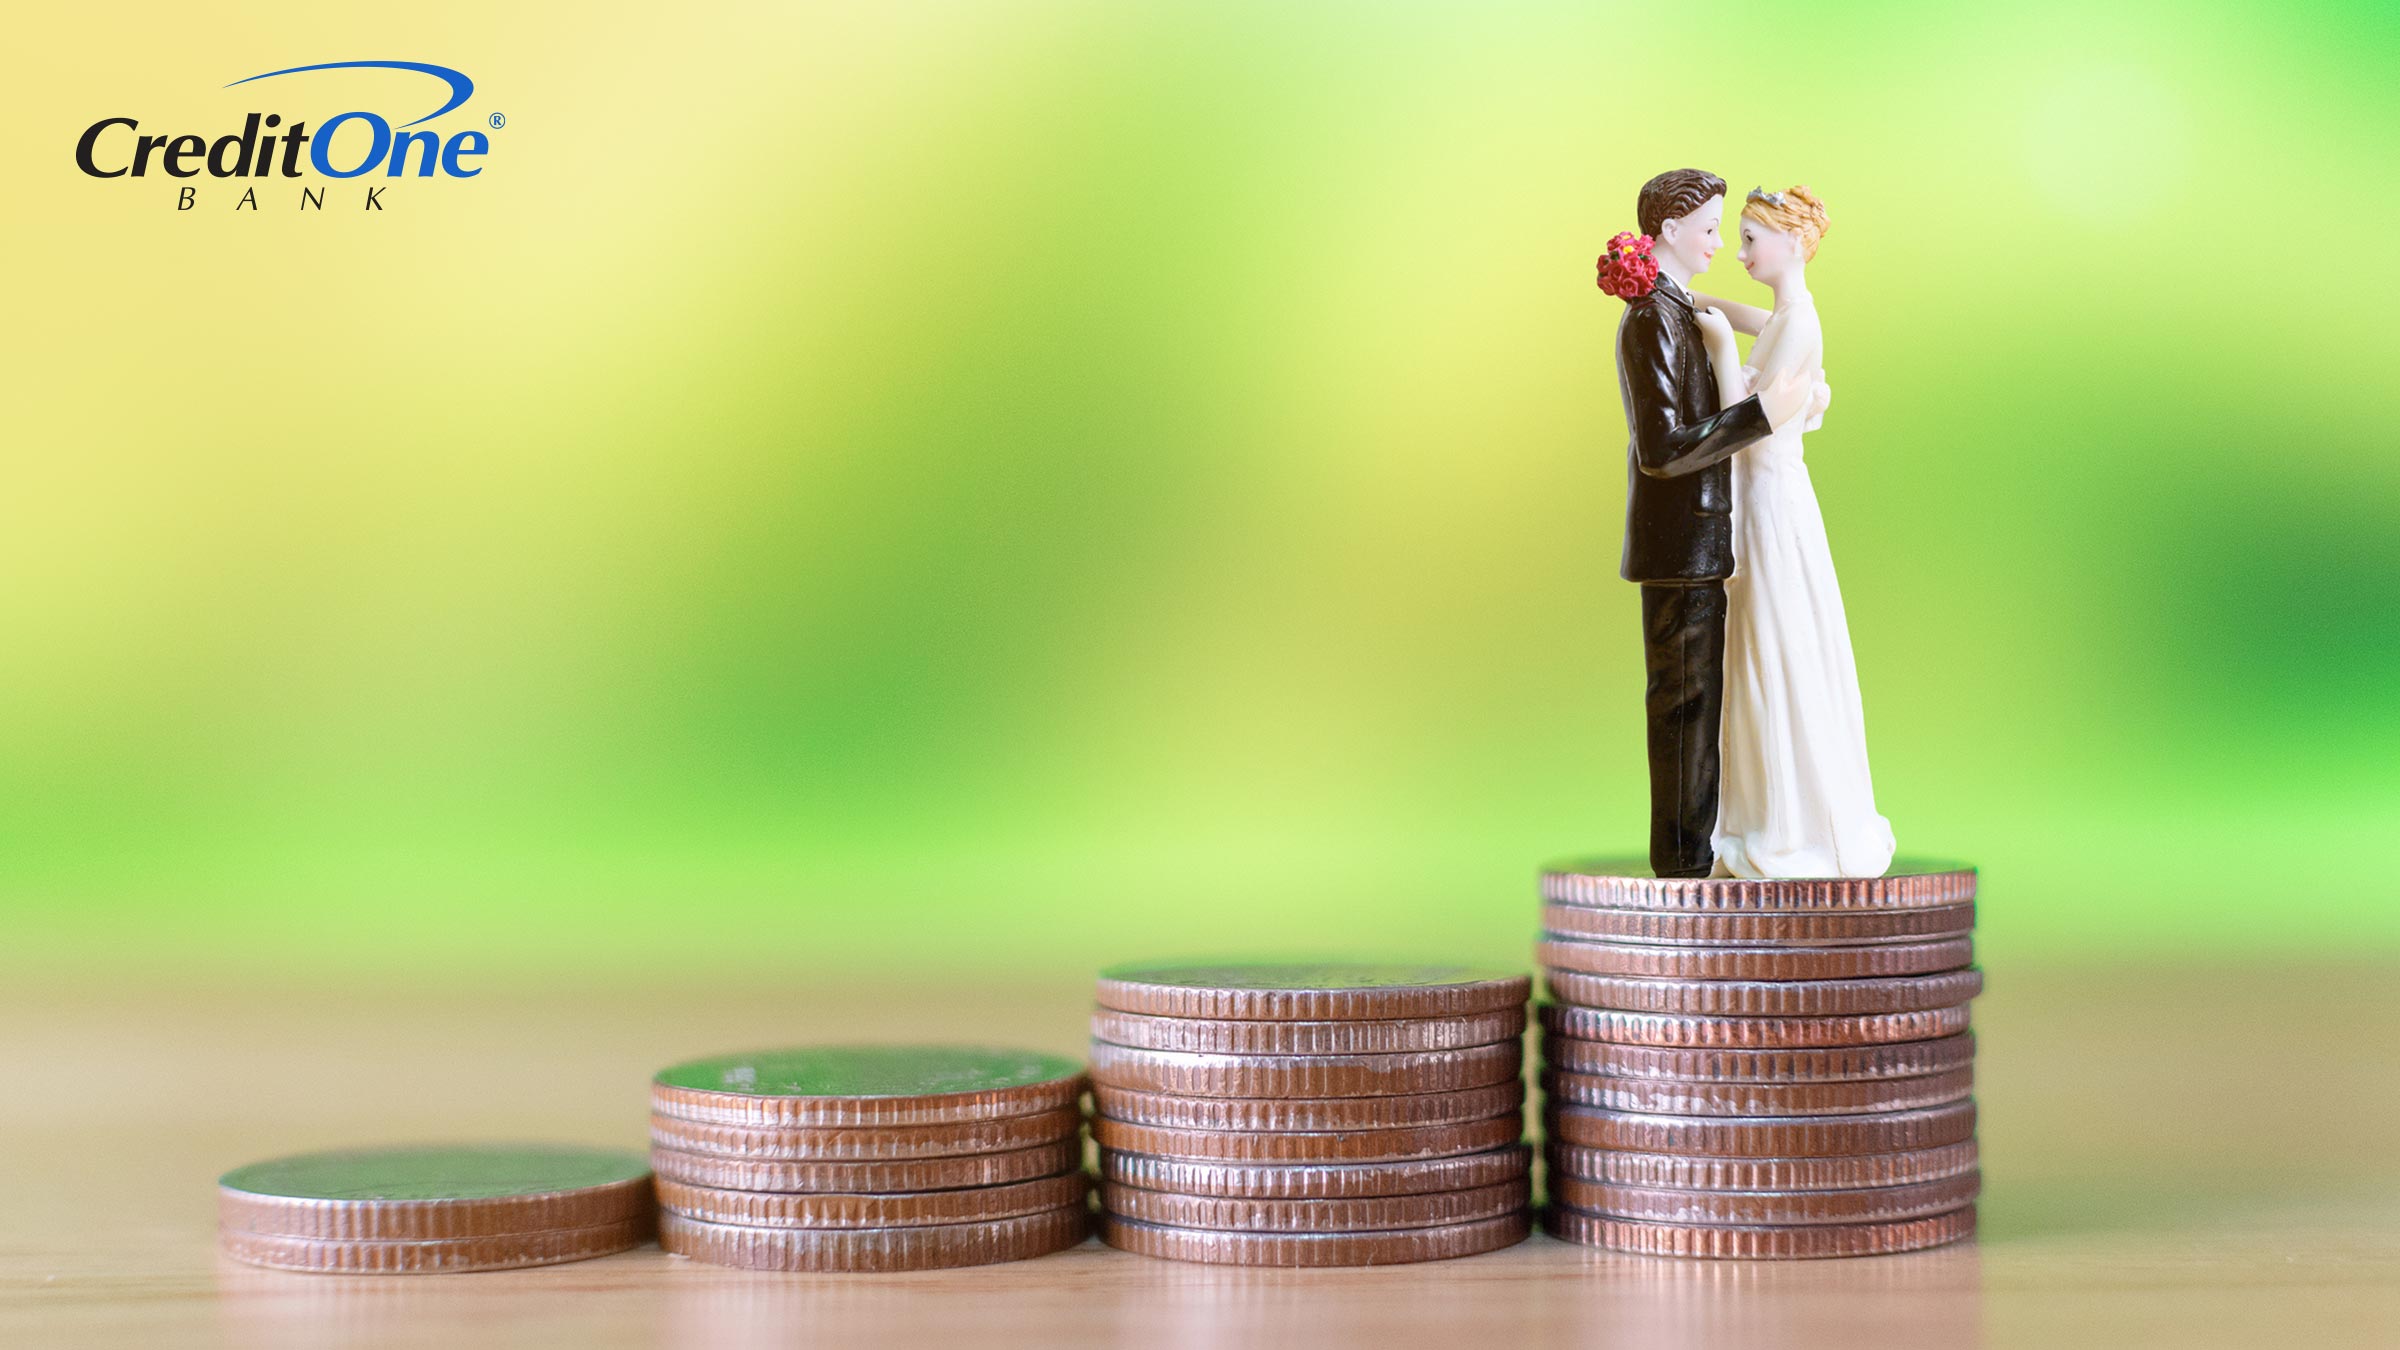 A bride and groom cake topper stands on the highest of several stacks of coins, representing the rising costs of weddings.